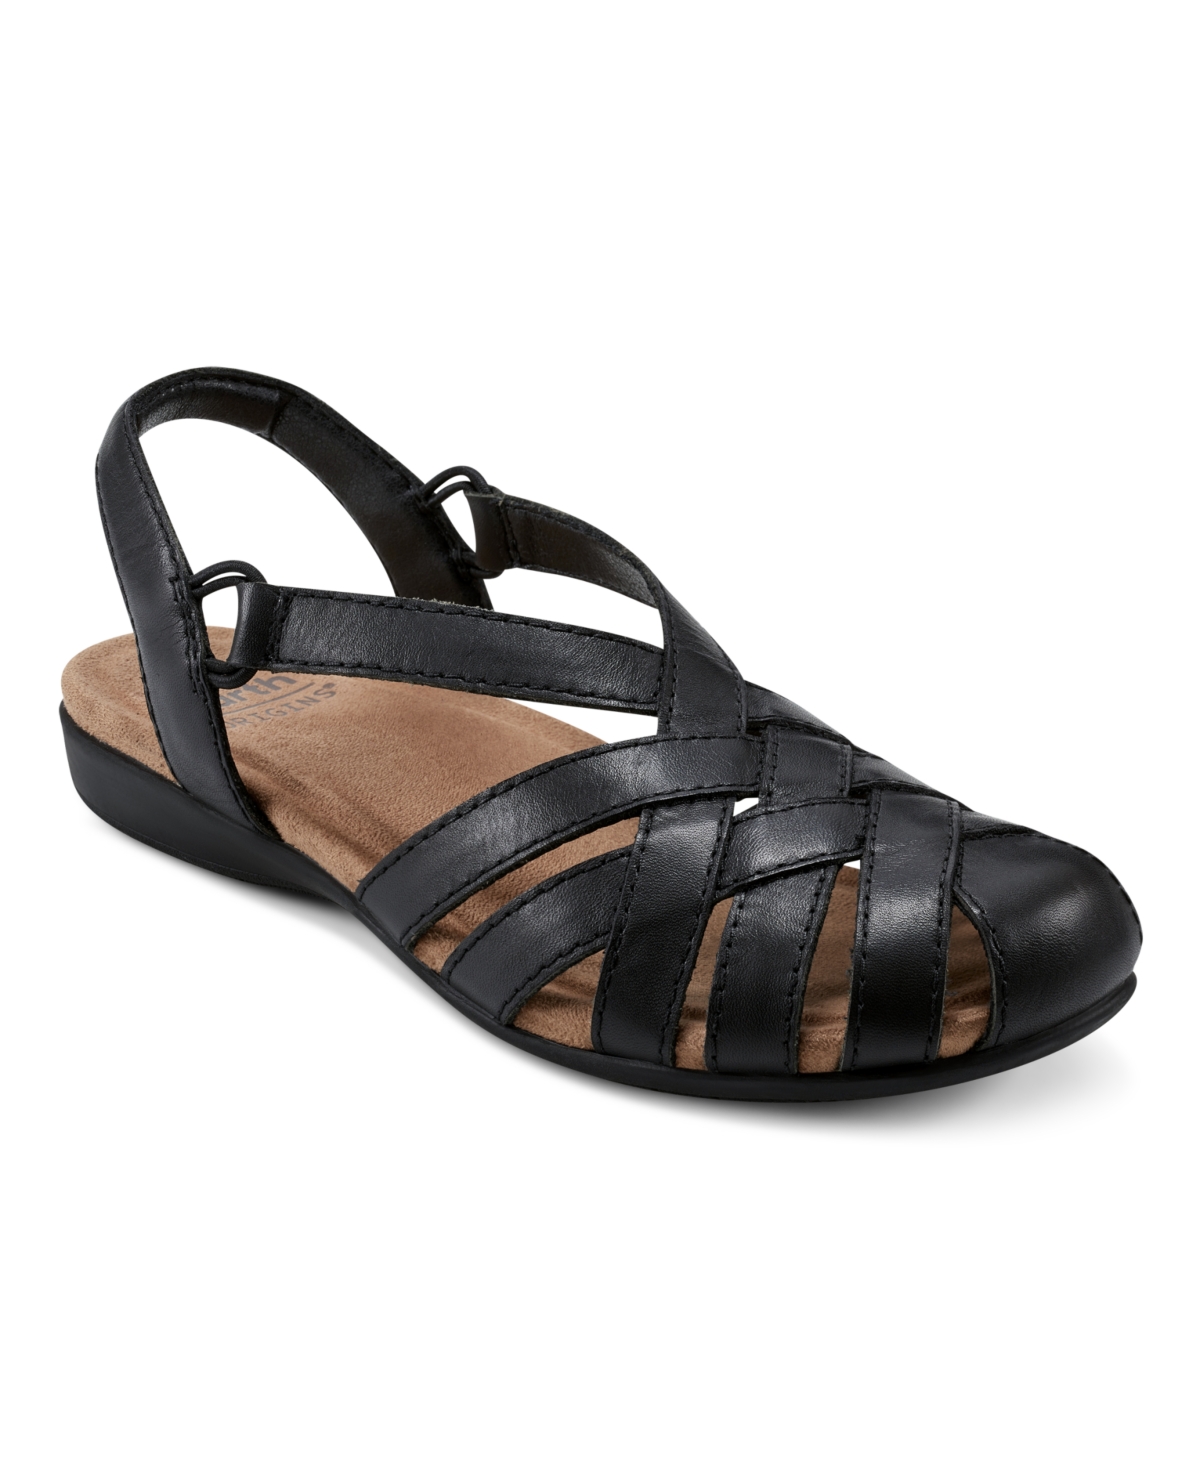 Earth Women's Berri Woven Casual Round Toe Slip-on Sandals In Black Leather